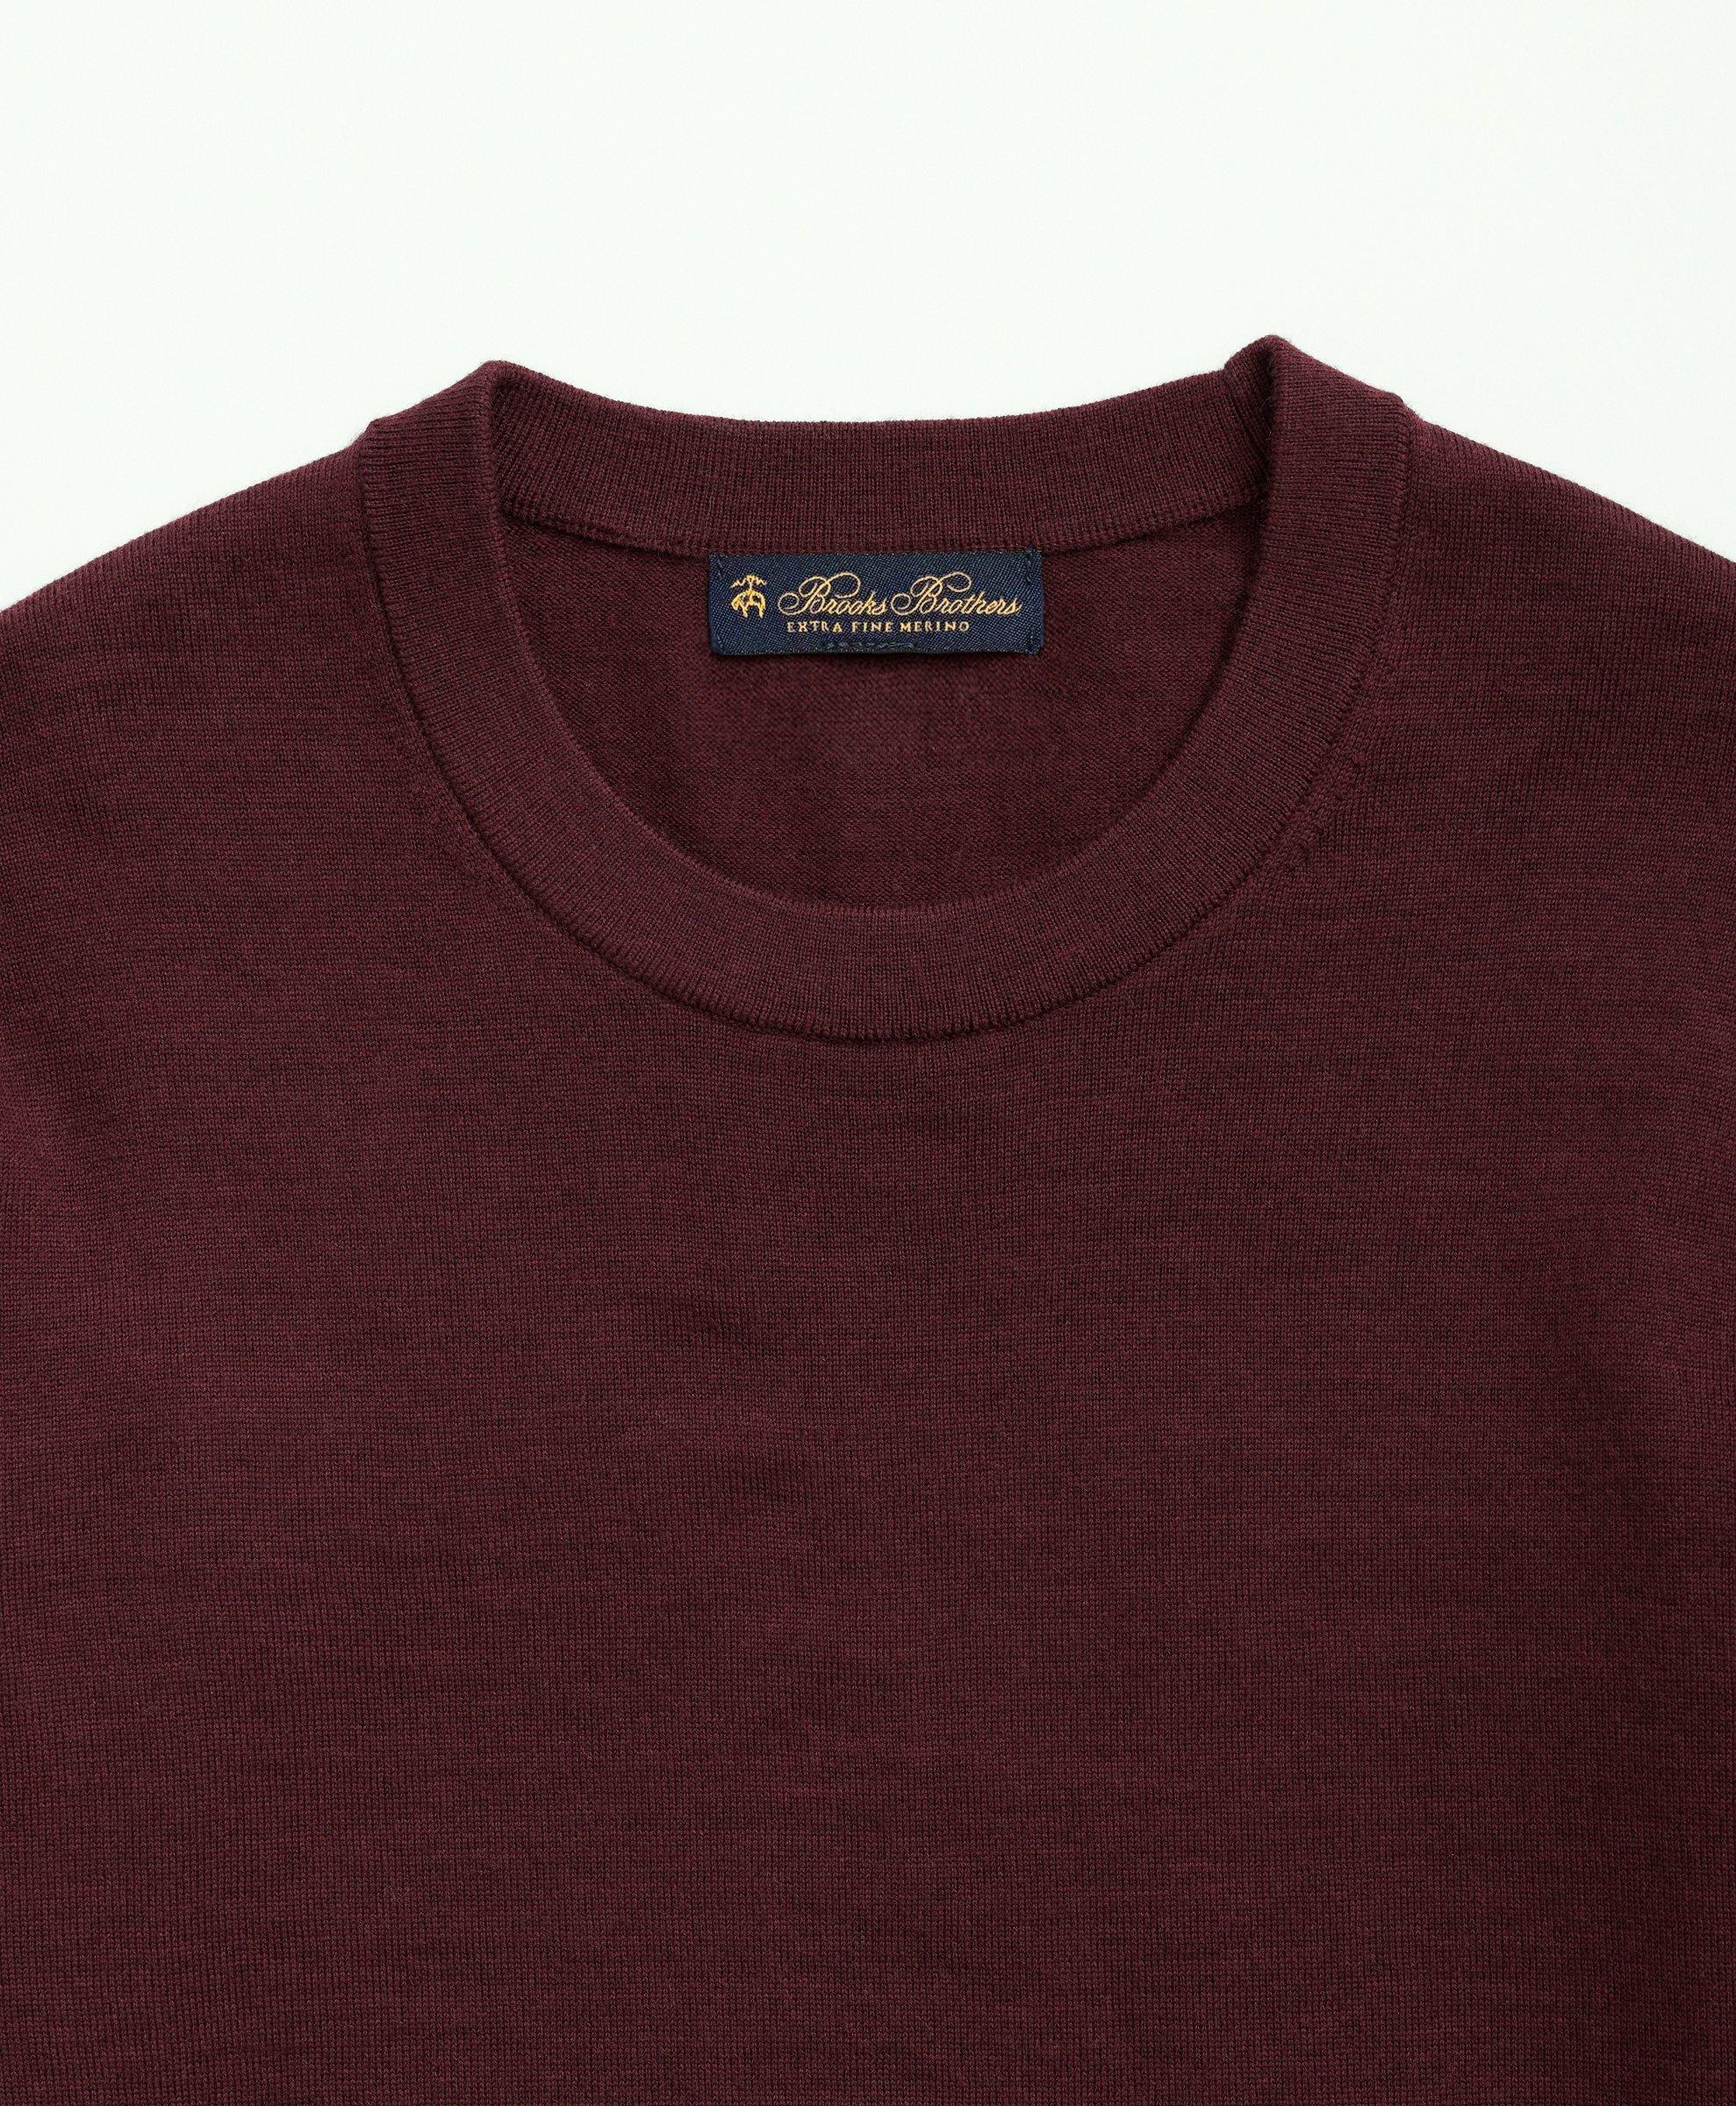 Brooks Brothers Men's Fine Merino Wool Crewneck Sweater | Burgundy | Size 2XL - Shop Holiday Gifts and Styles